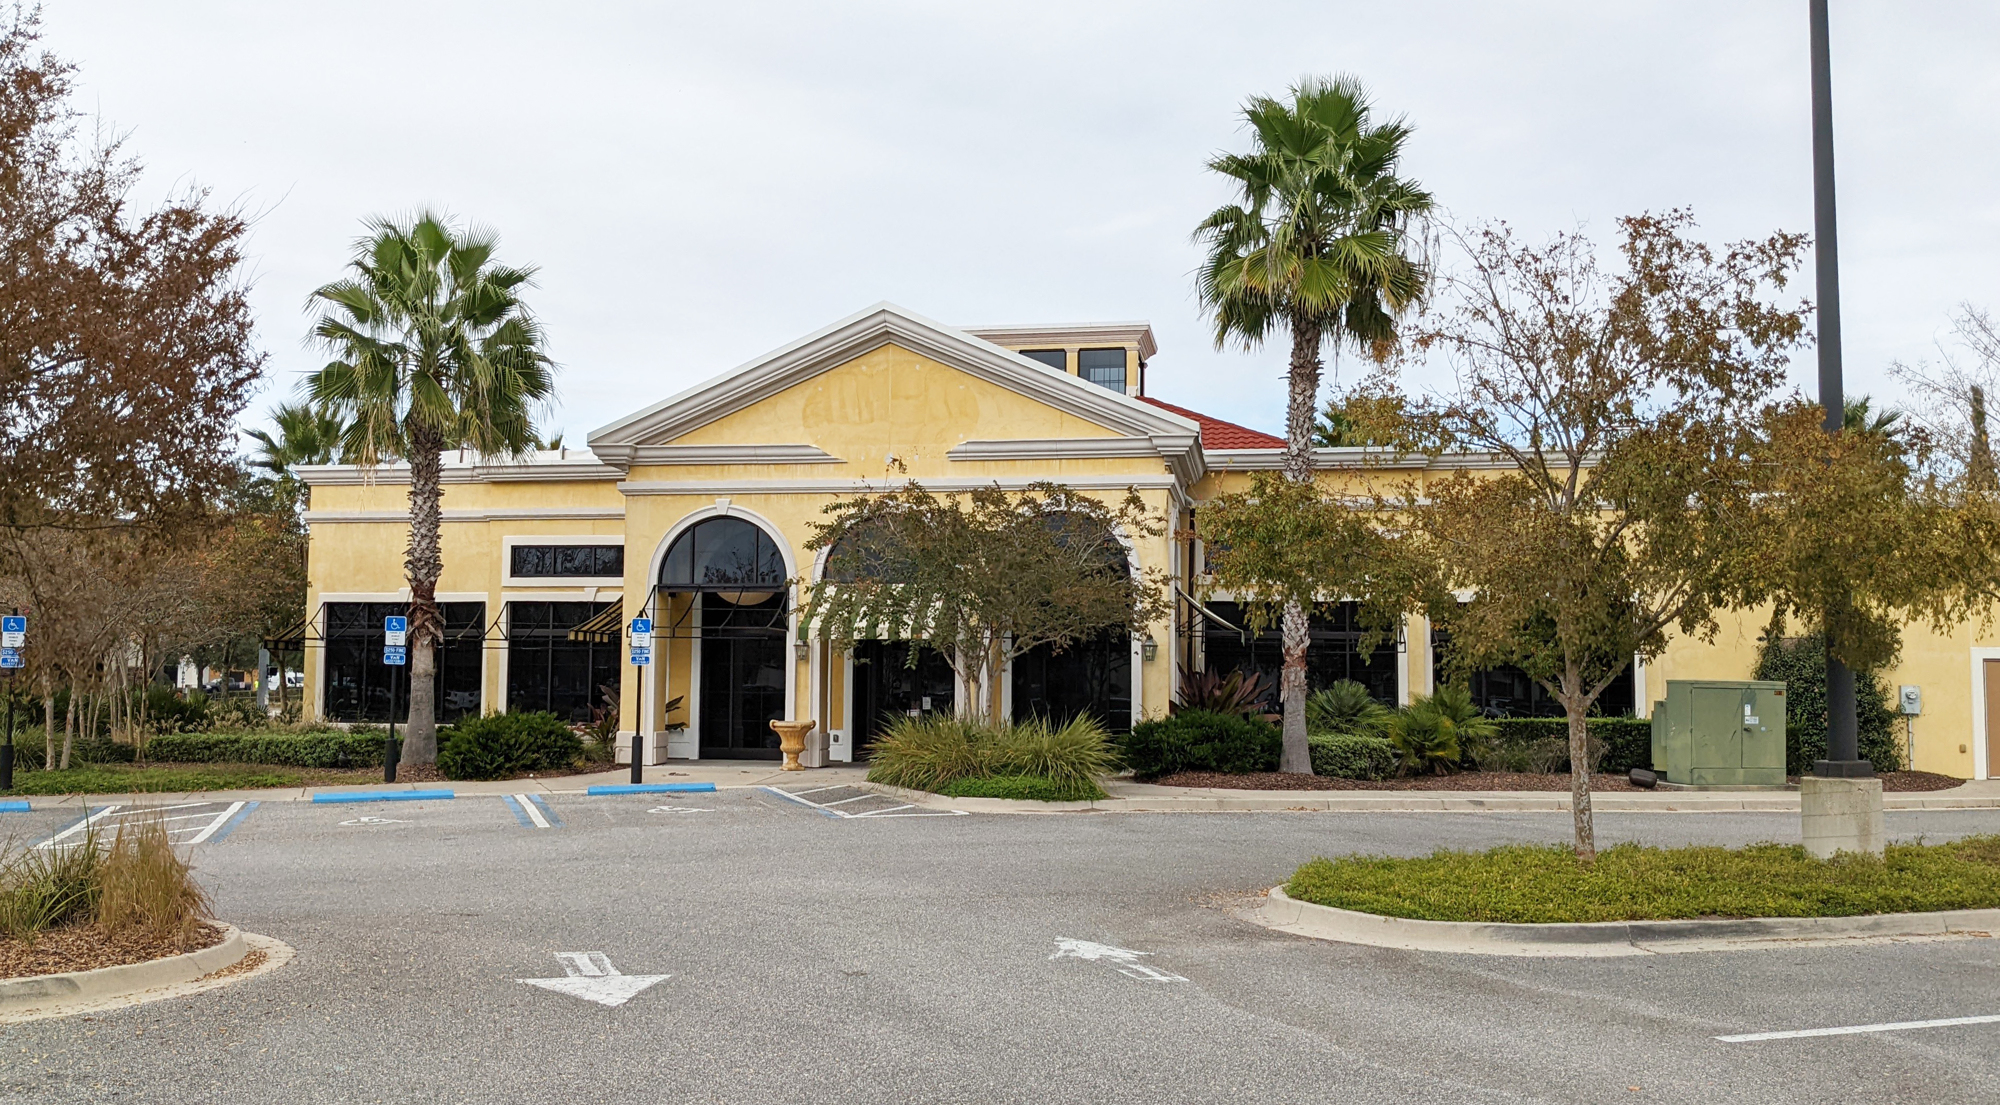 The city issued permits Oct. 17 for Sugar Factory to put up two signs at the restaurant under renovation at 4910 Big Island Drive, the former Brio Tuscan Grille.